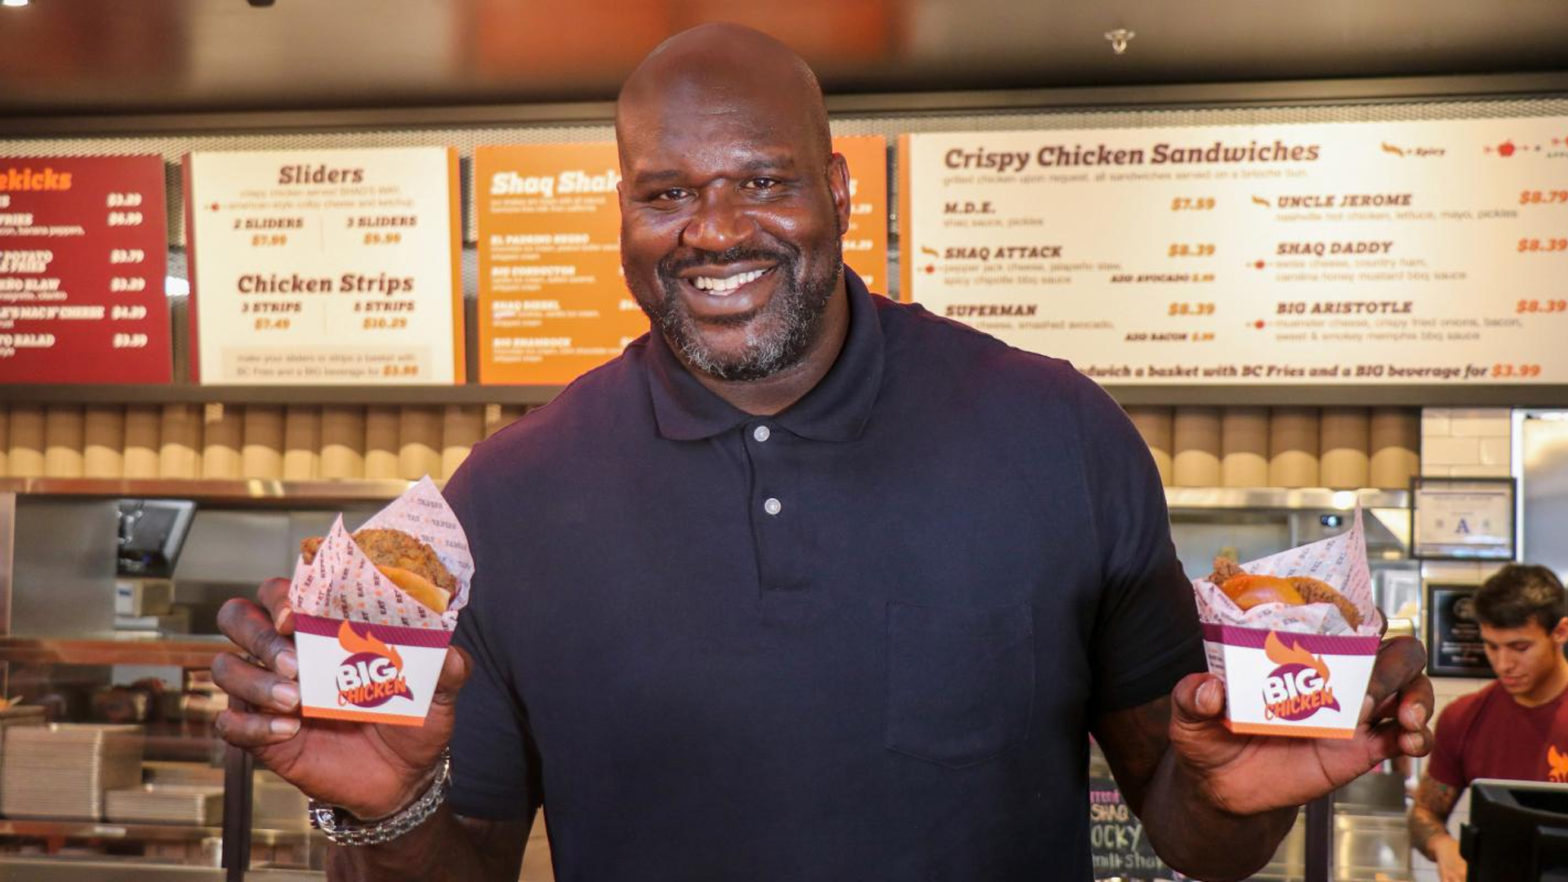 Shaquille O’Neal’s Big Chicken Fast-Food Chain Signs 20-Unit Development Deal